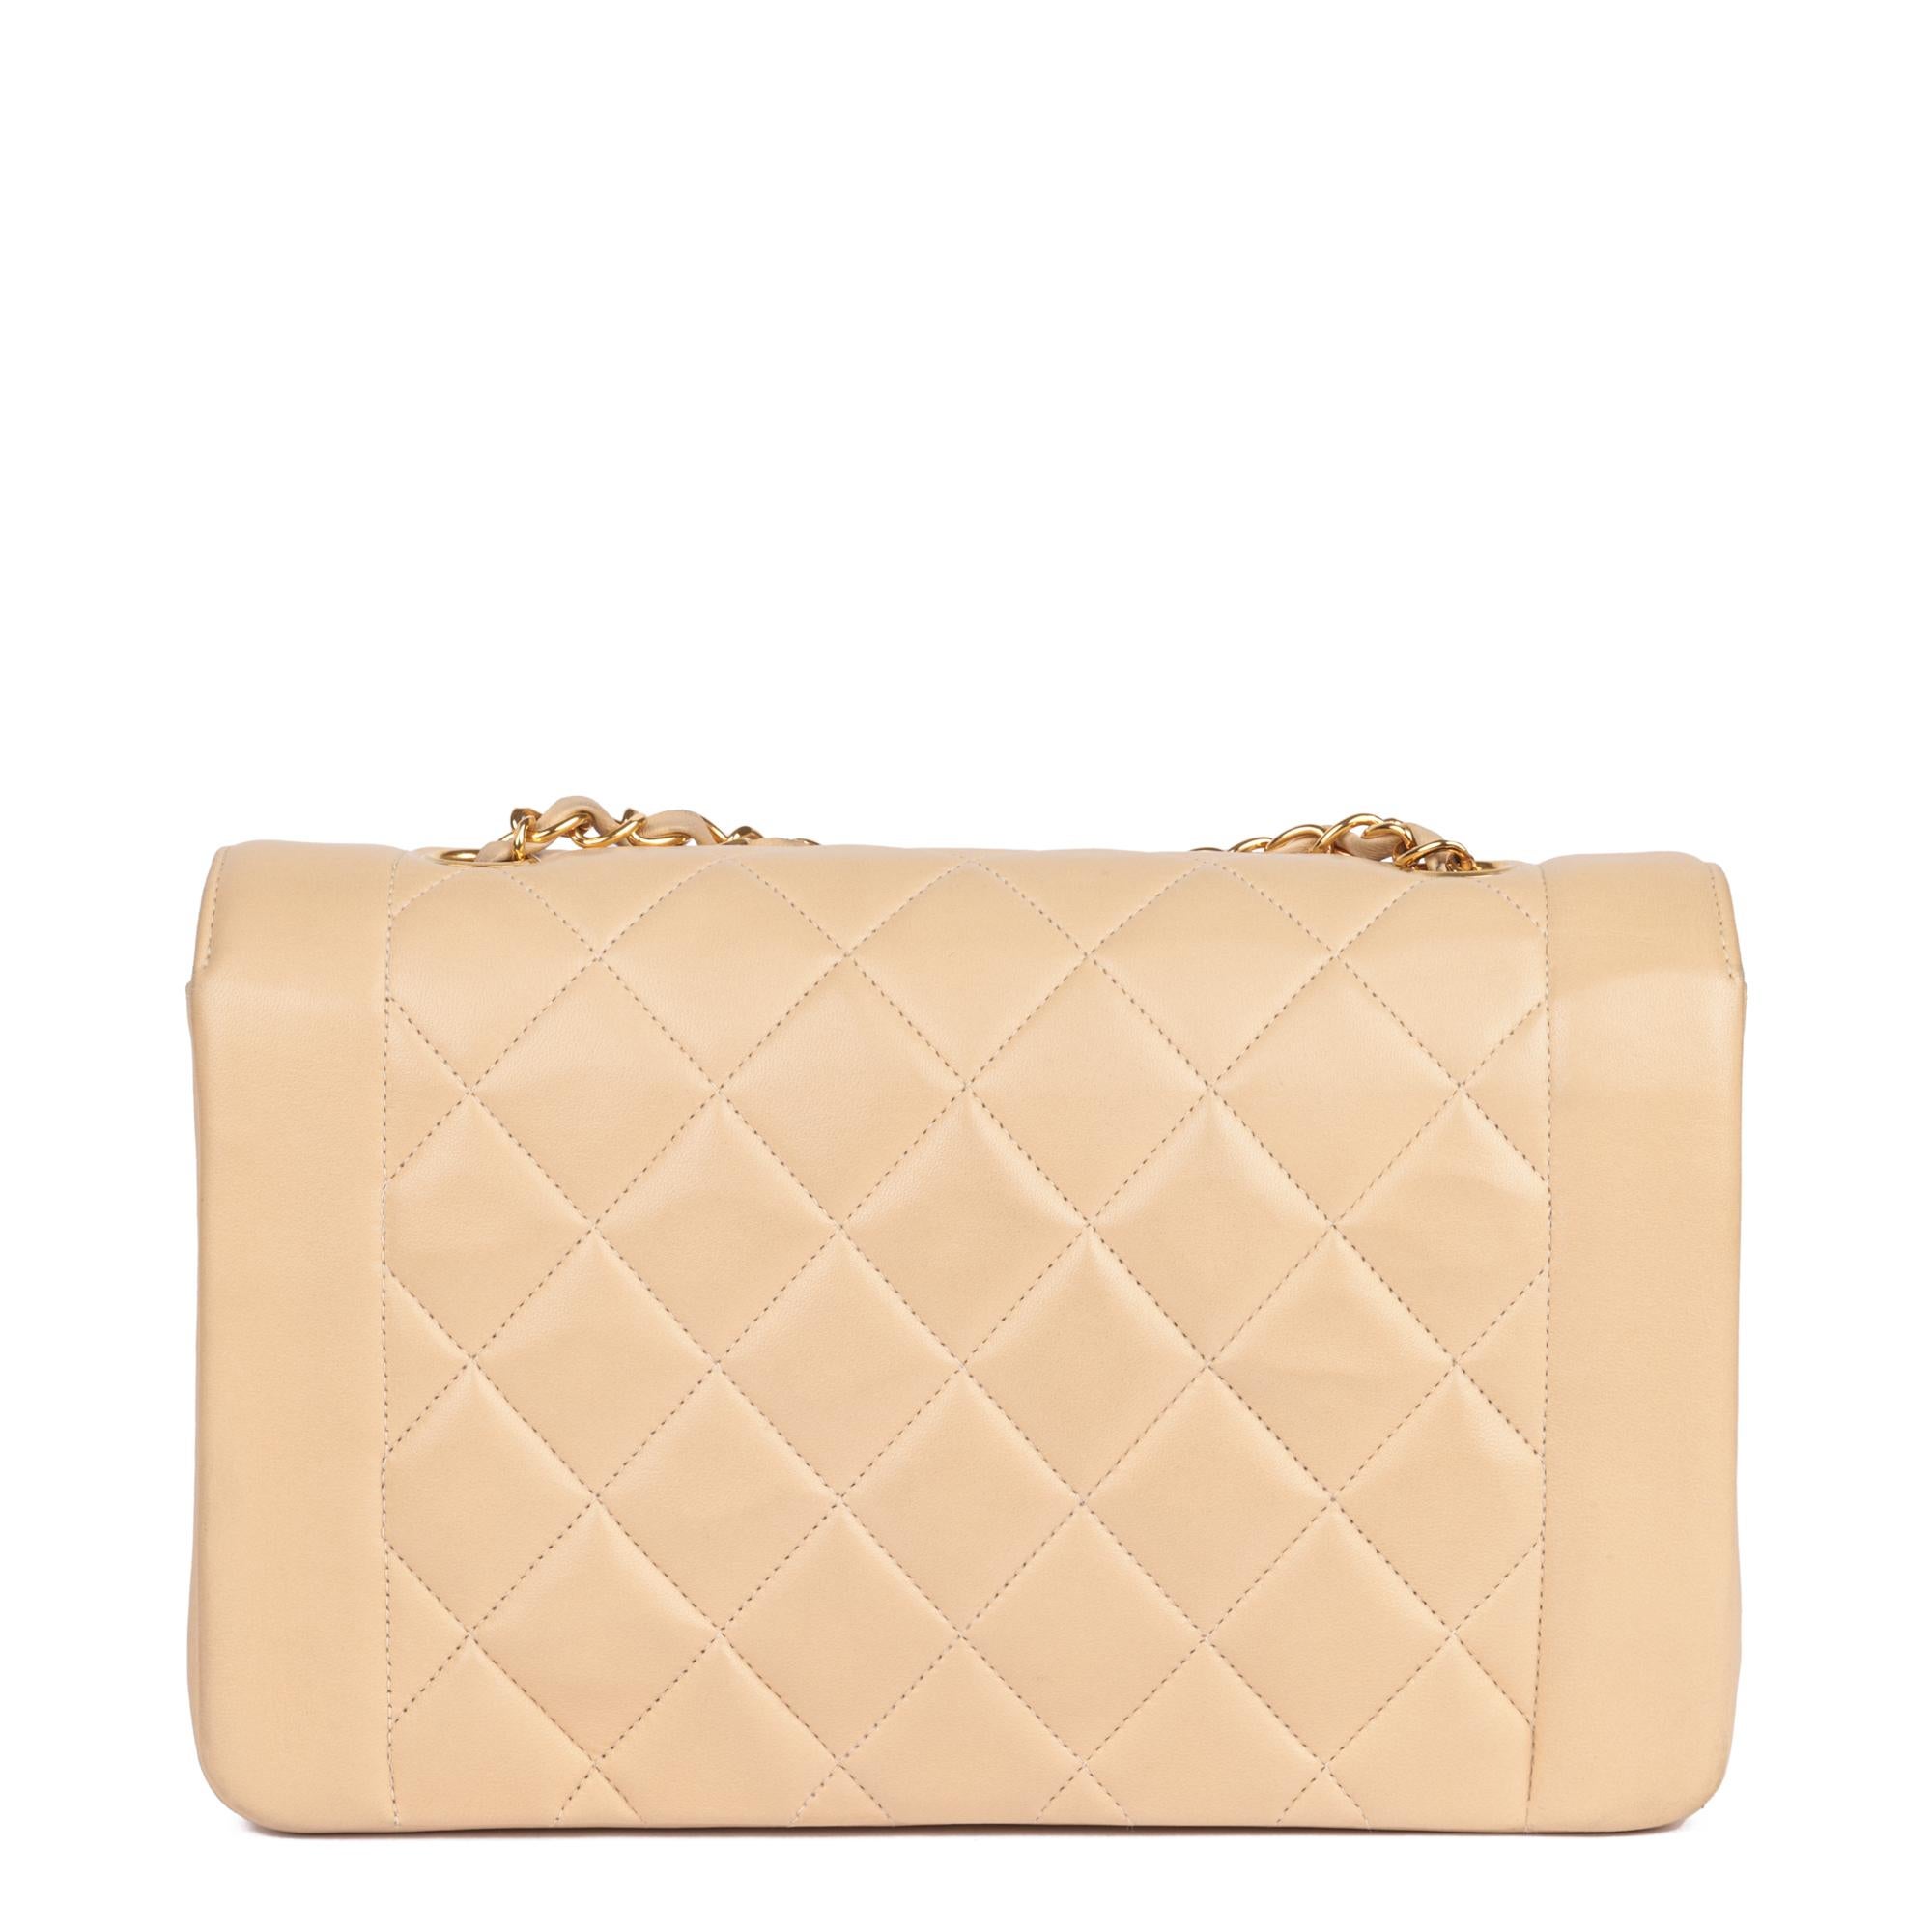 CHANEL Beige Quilted Lambskin Vintage Medium Diana Classic Single Flap Bag 1